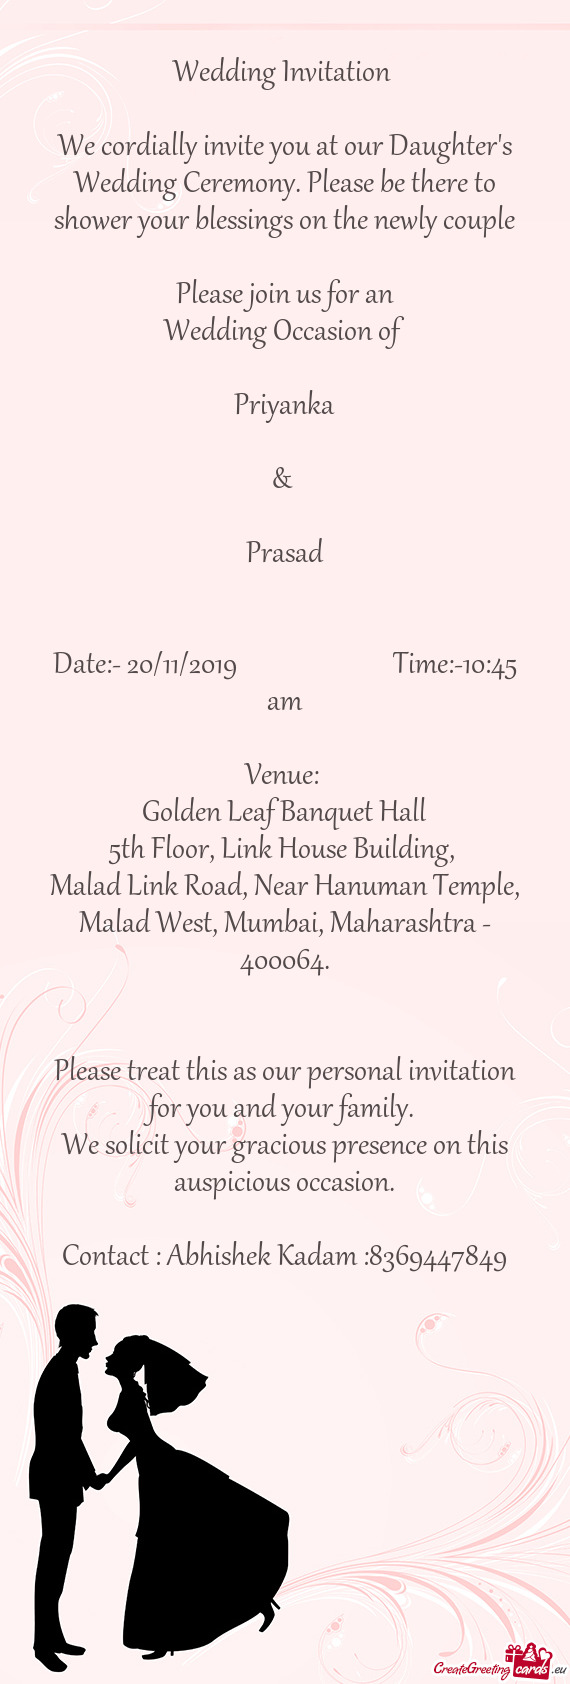 Date:- 20/11/2019       Time:-10:45 am